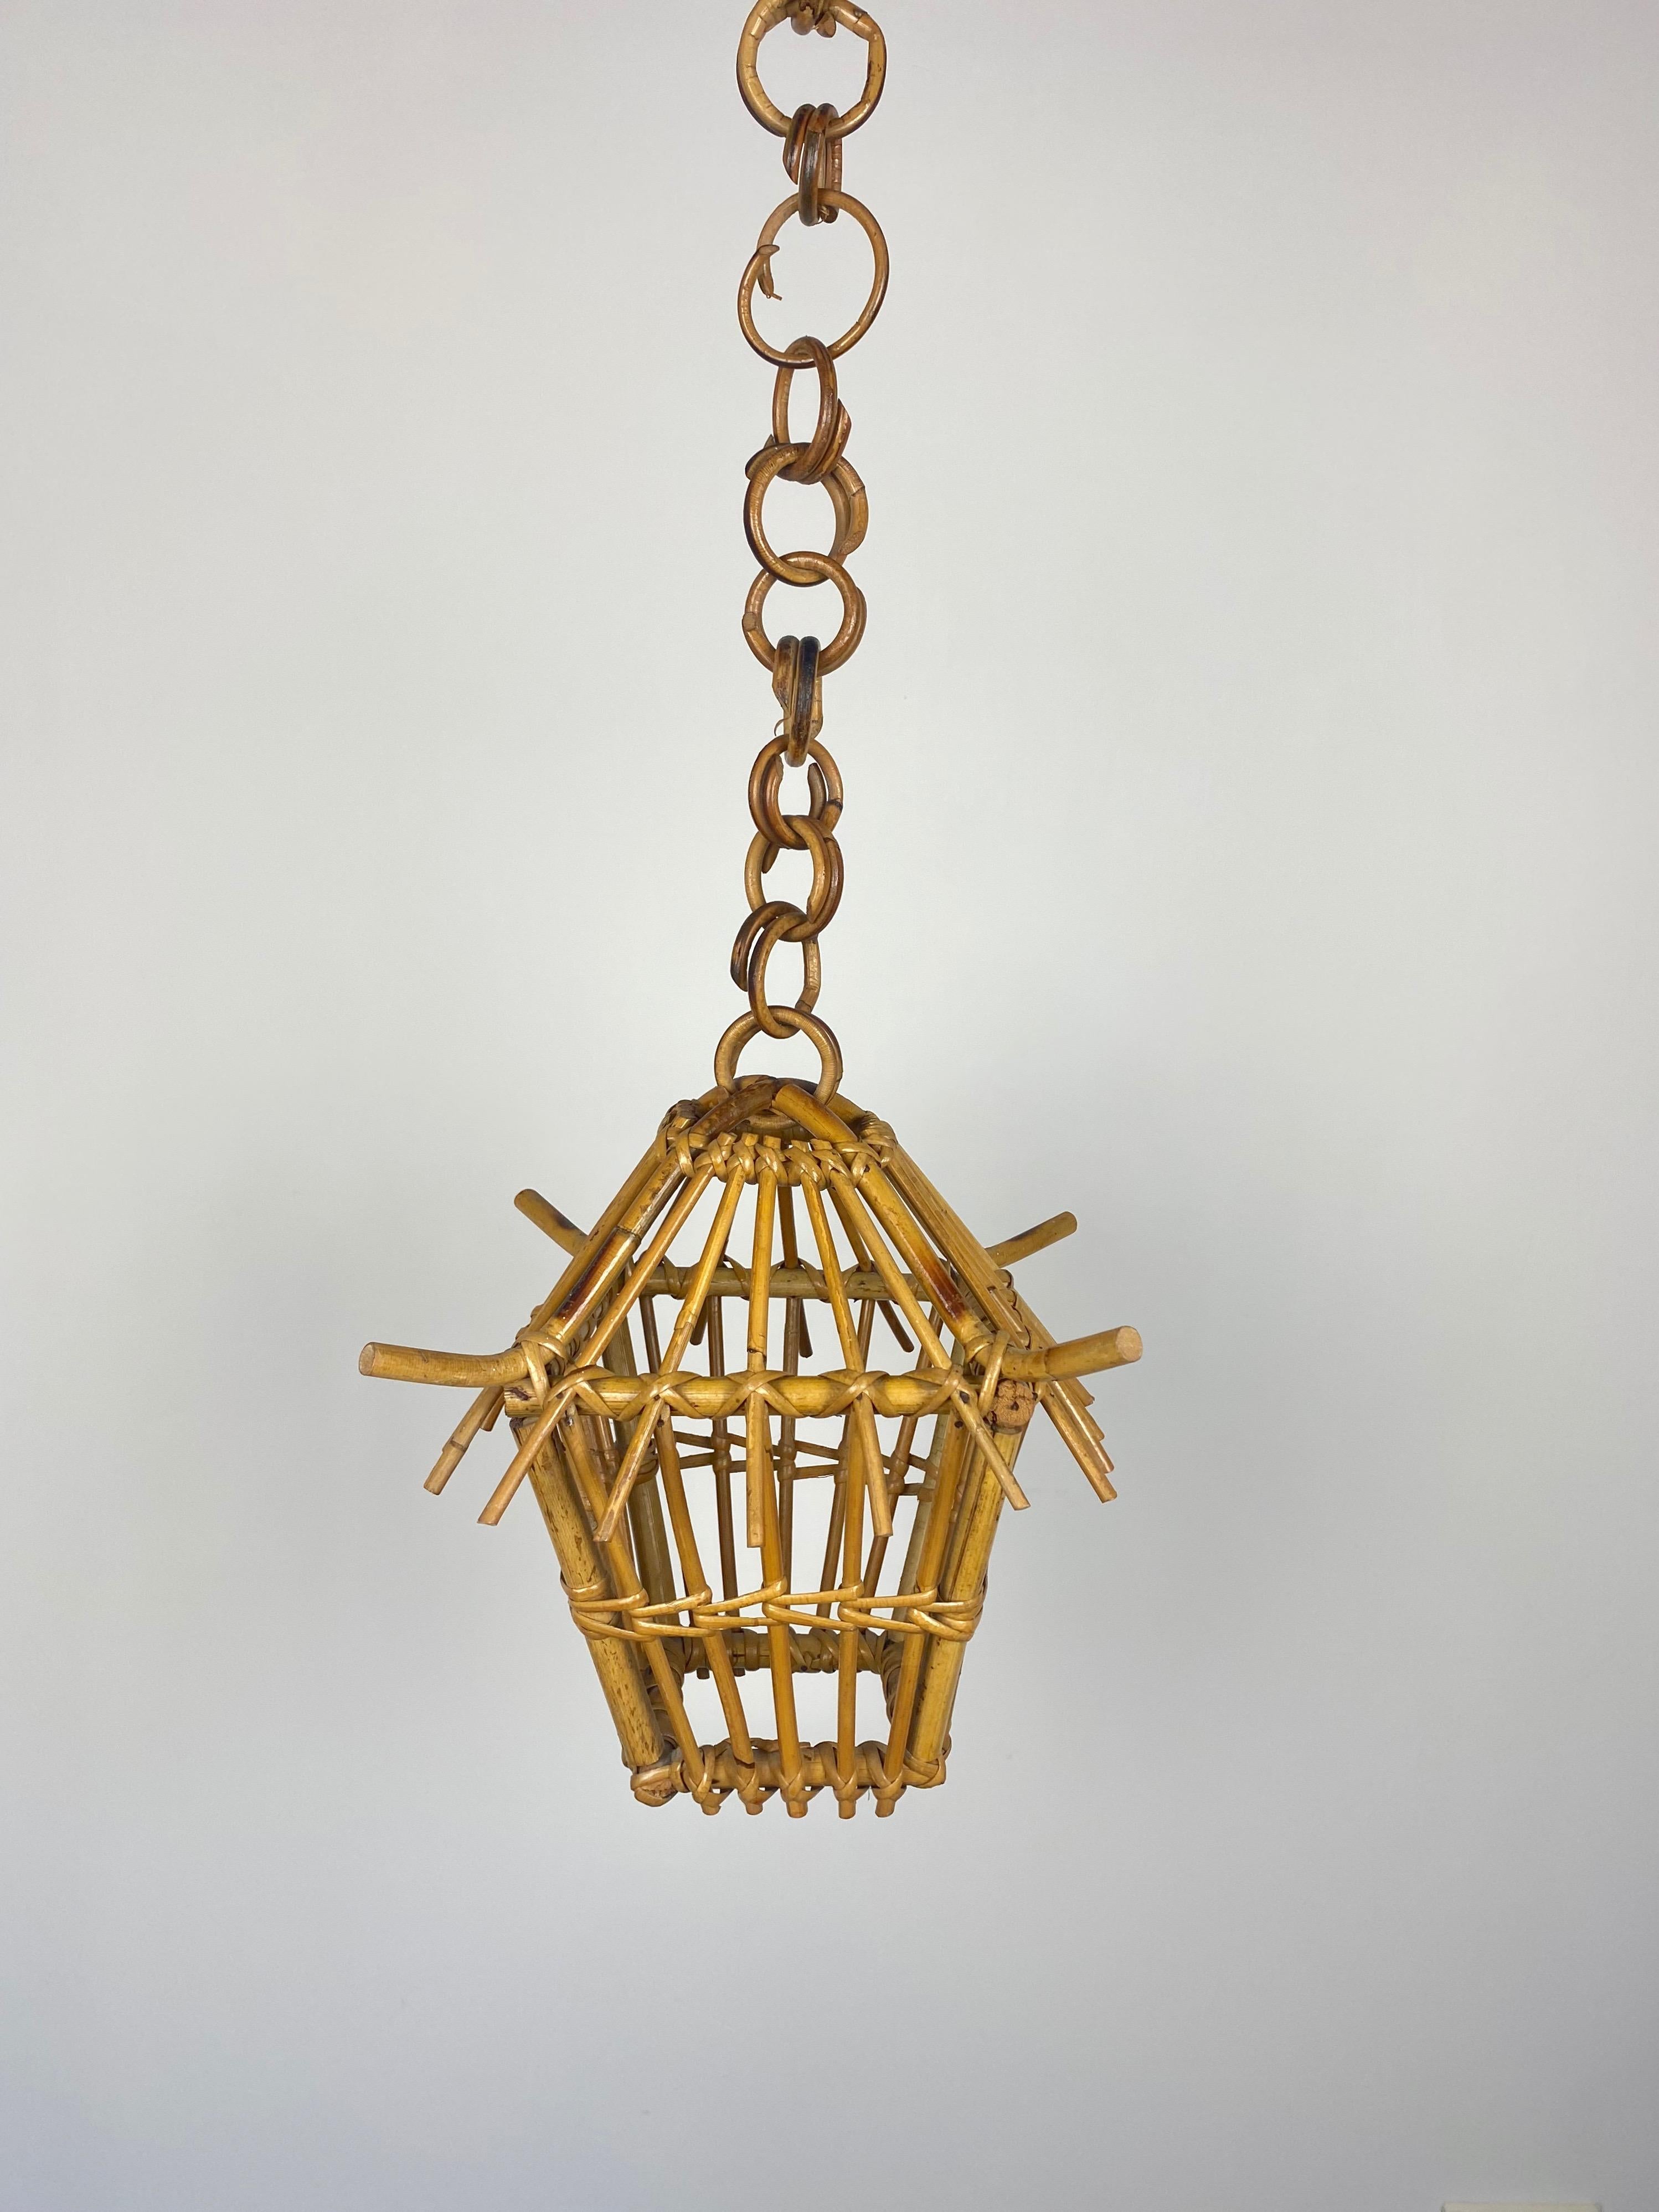 Mid-20th Century Bamboo and Rattan Lantern Chandelier Pendant, Italy, 1960s For Sale